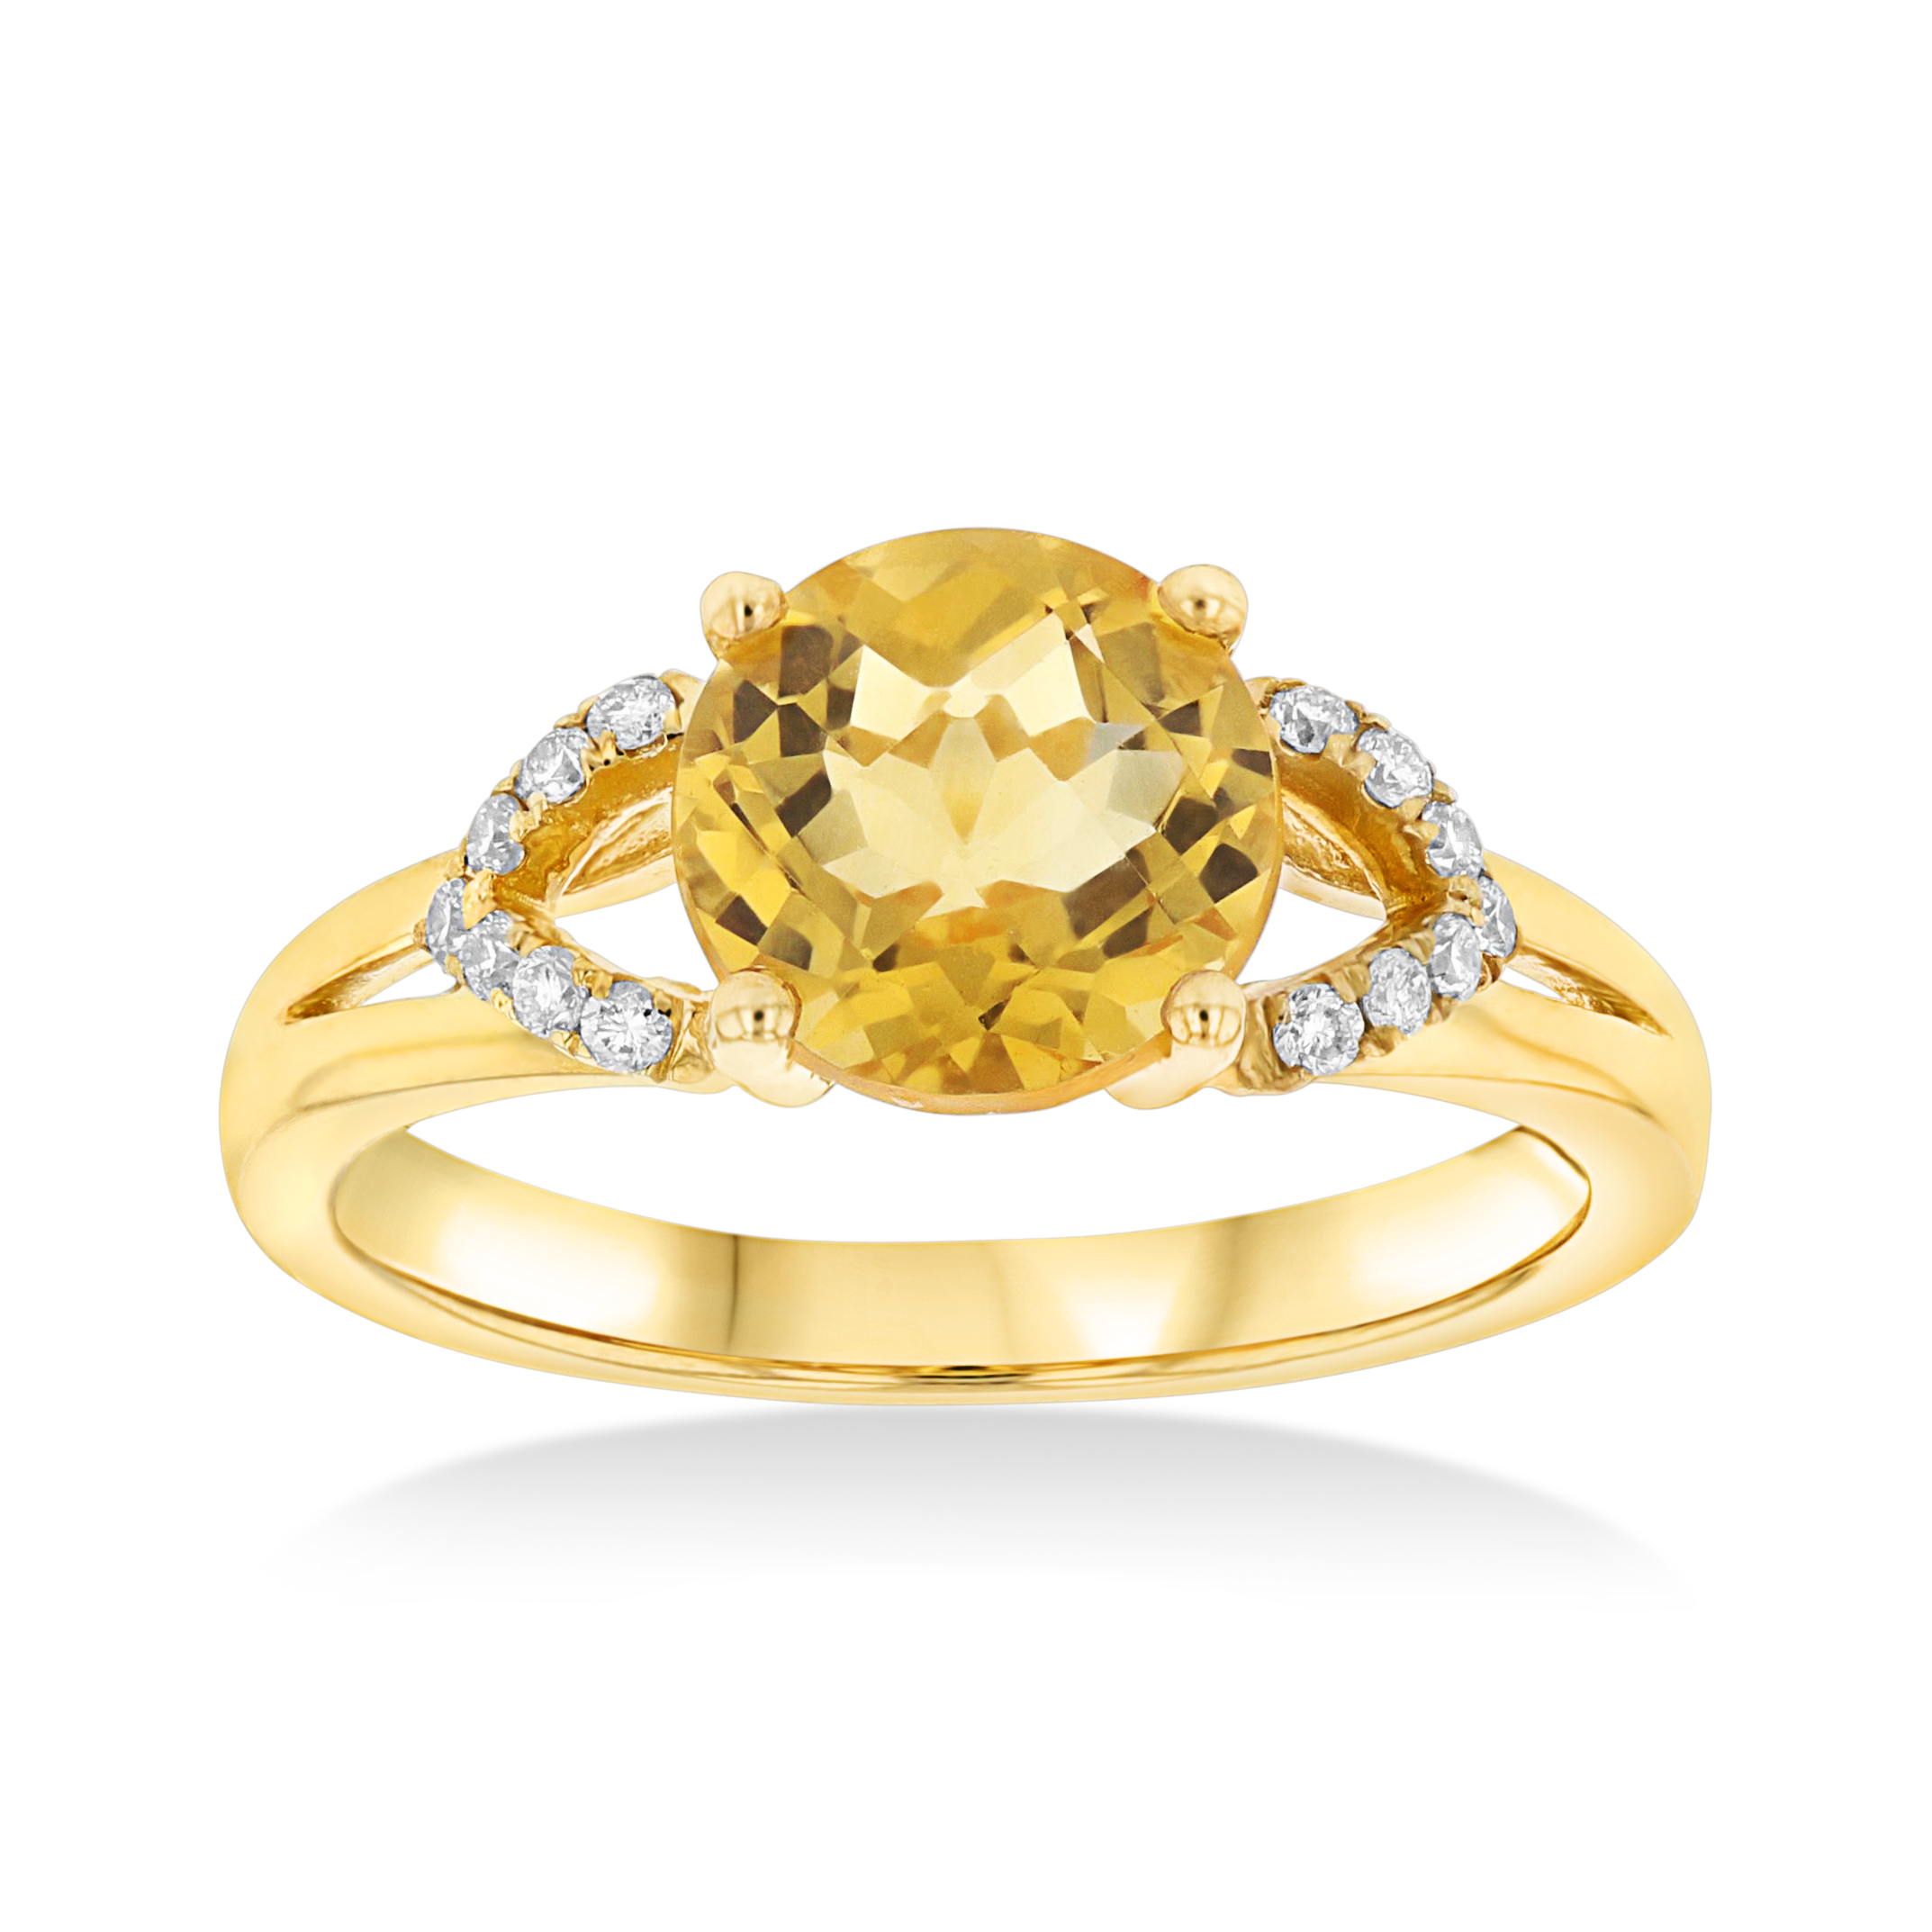 0.12ctw Diamond and Citrine Fashion ring in 18k YG